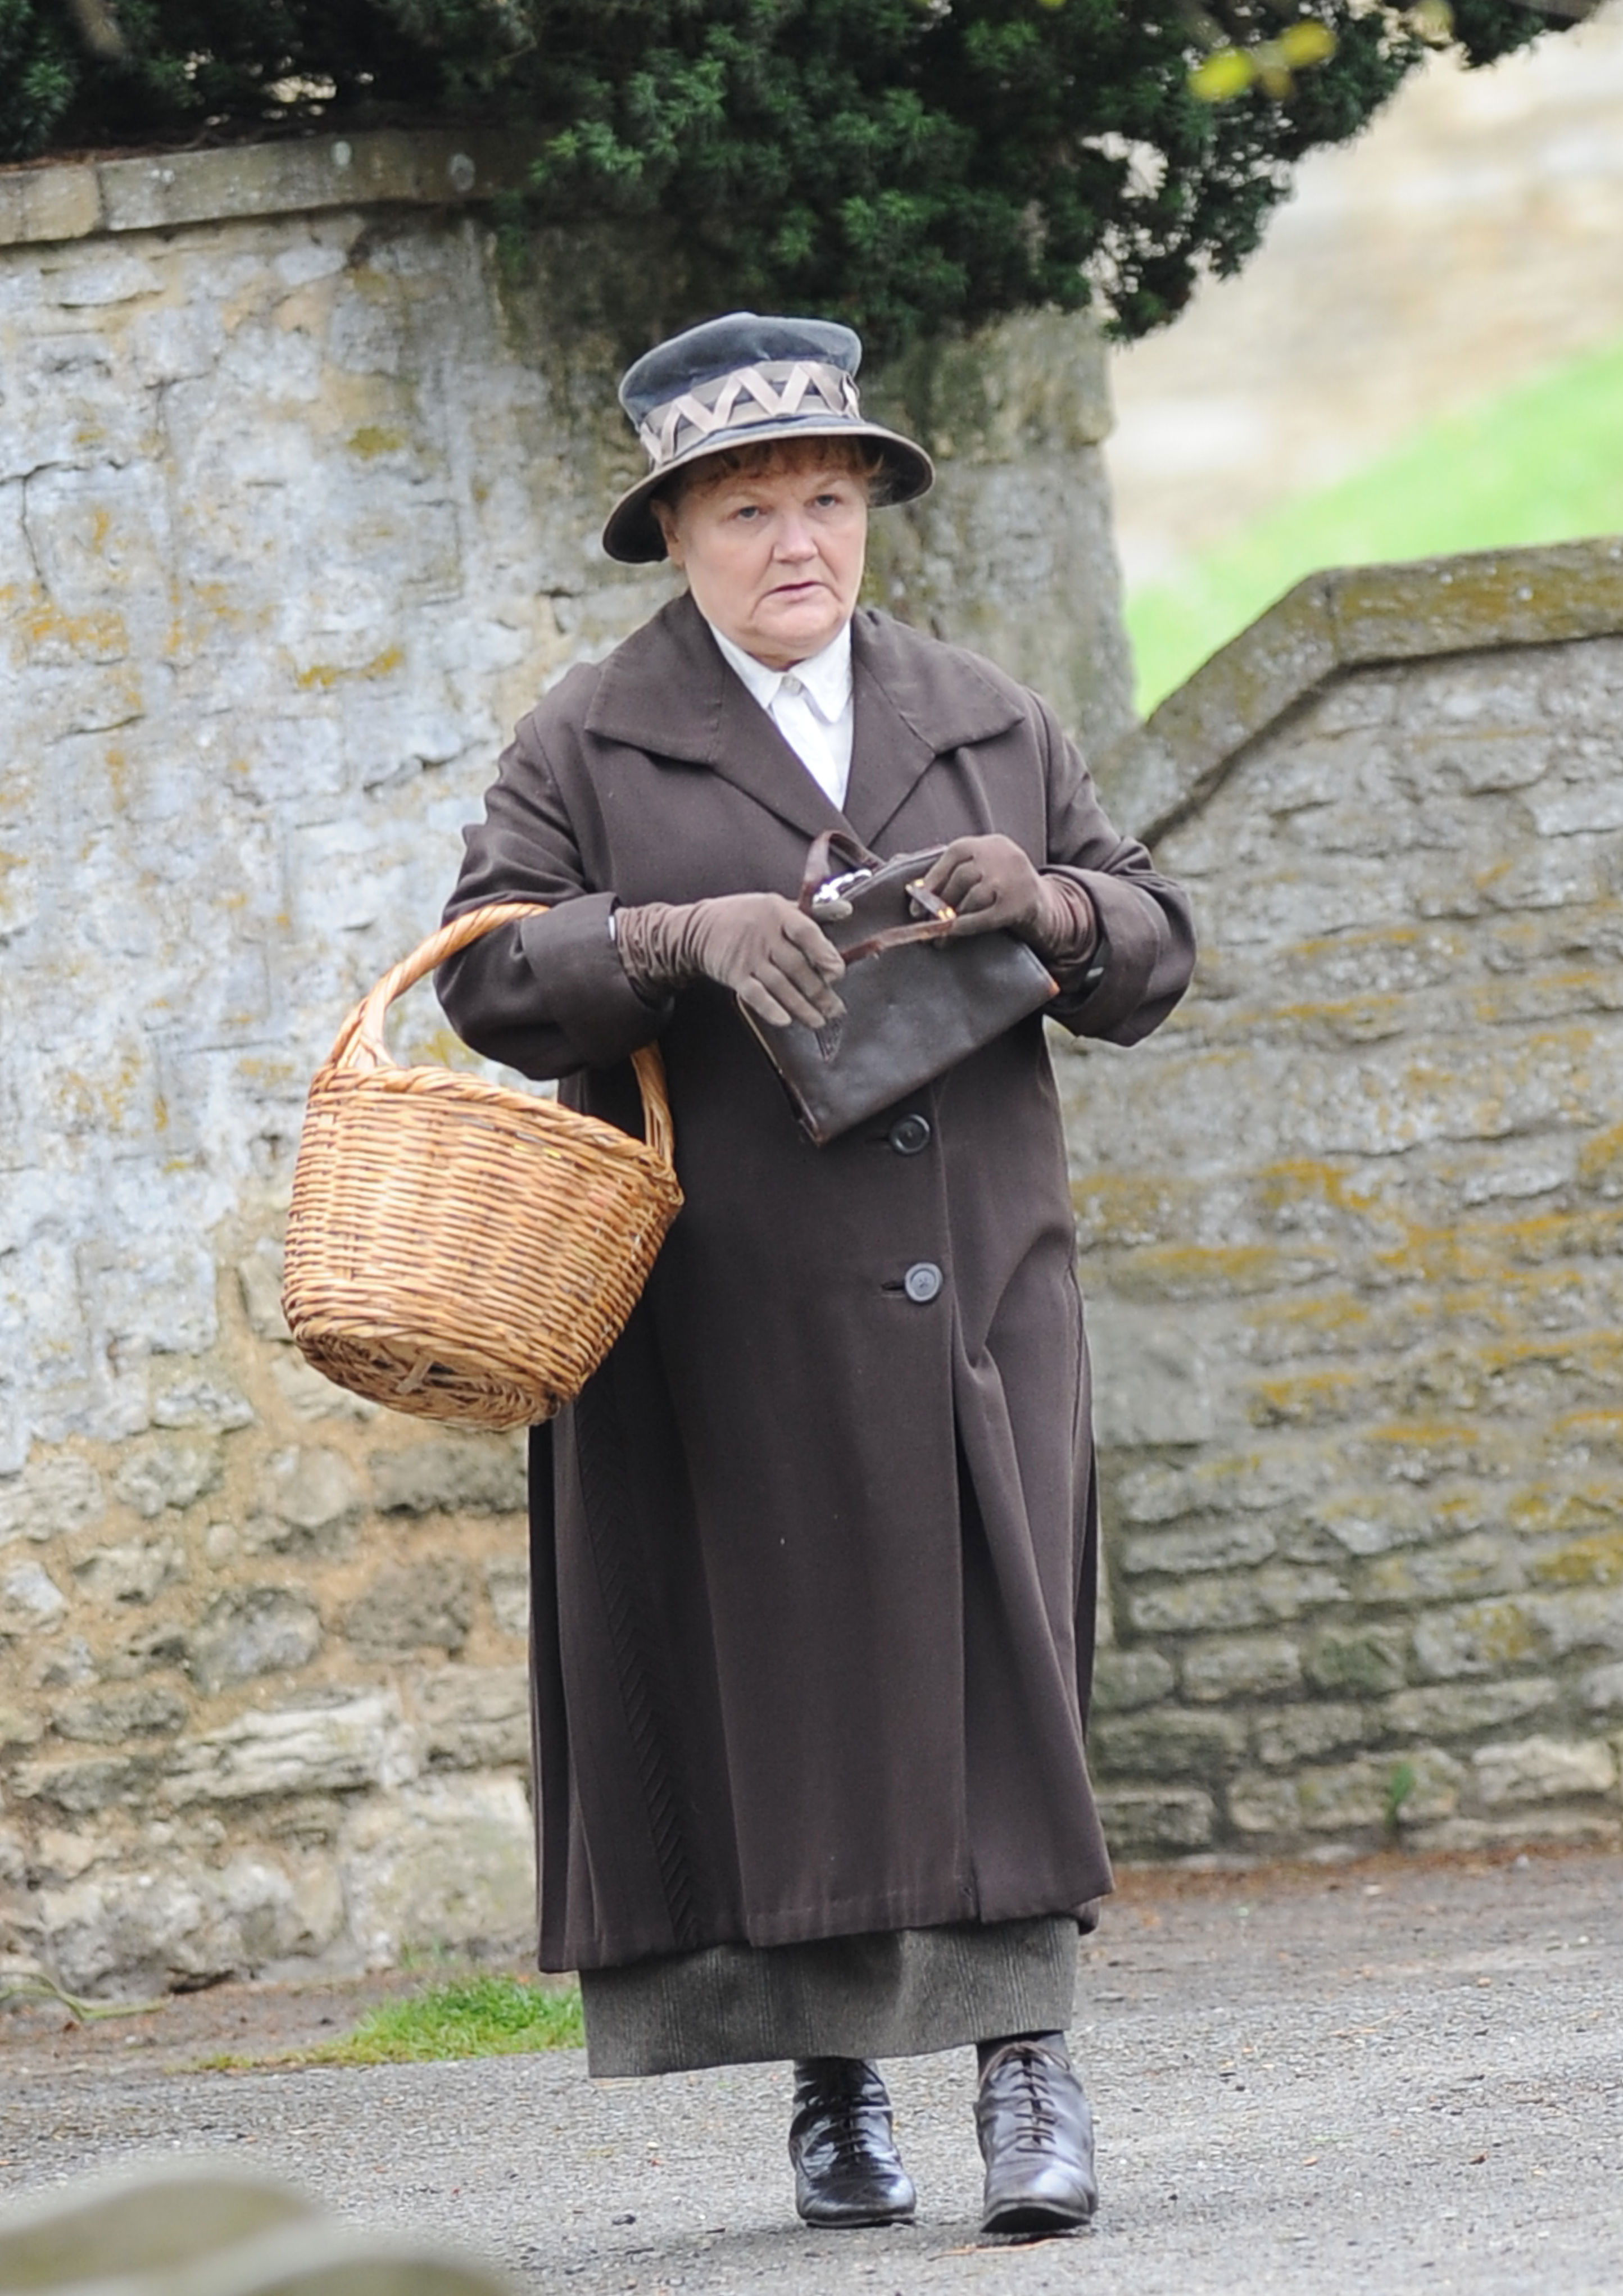 <p>Here's Downton Abbey's cook, Mrs. Patmore (Lesley Nicol), in early 20th century street clothes while filming the PBS series in Oxfordshire, England, in 2014.</p>